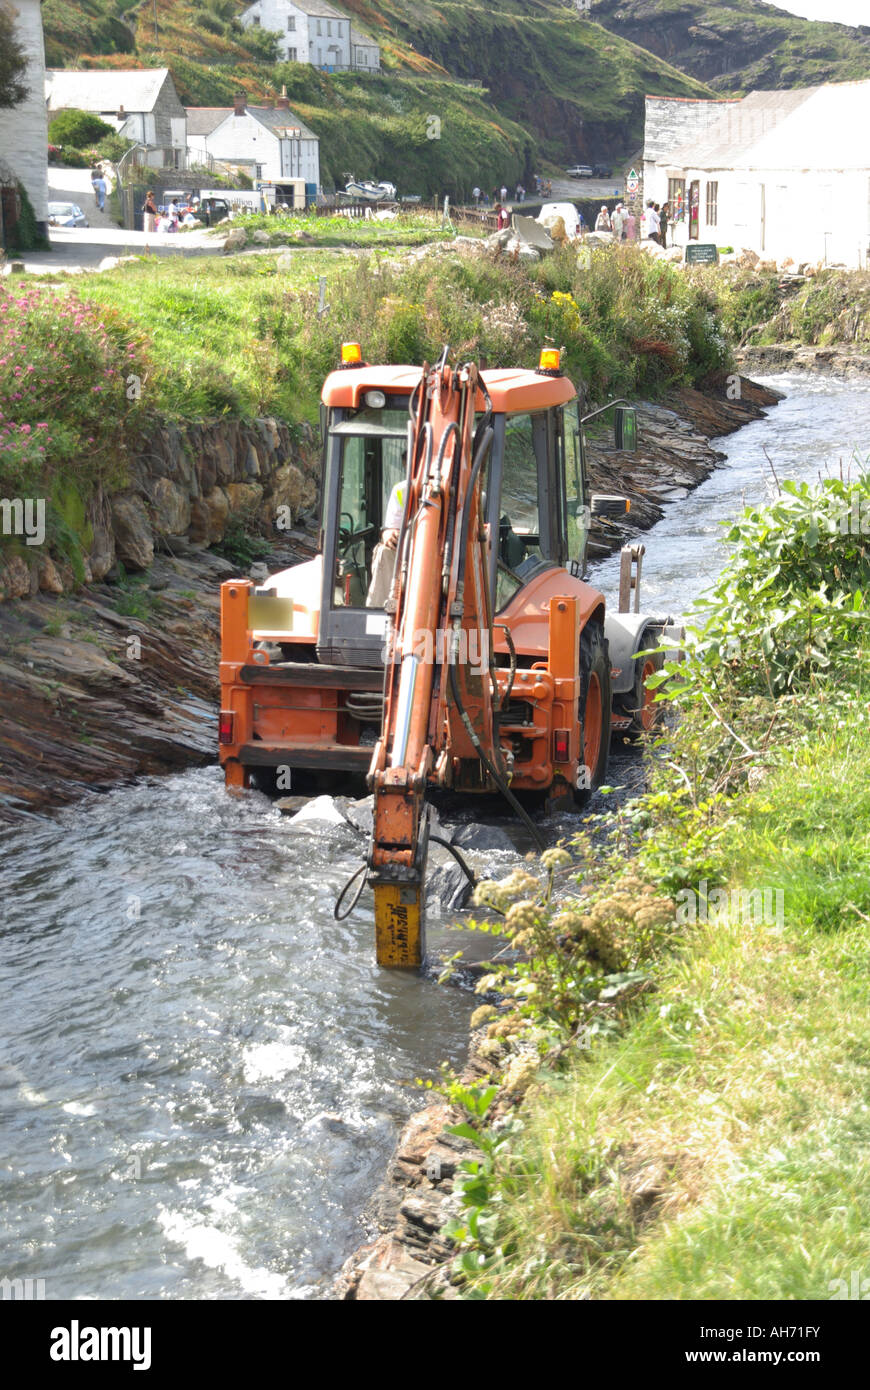 Hydraulic excavator driver at work breaking up rock to deepen & improve capacity of River Valency at Boscastle Cornwall England UK after severe flood Stock Photo